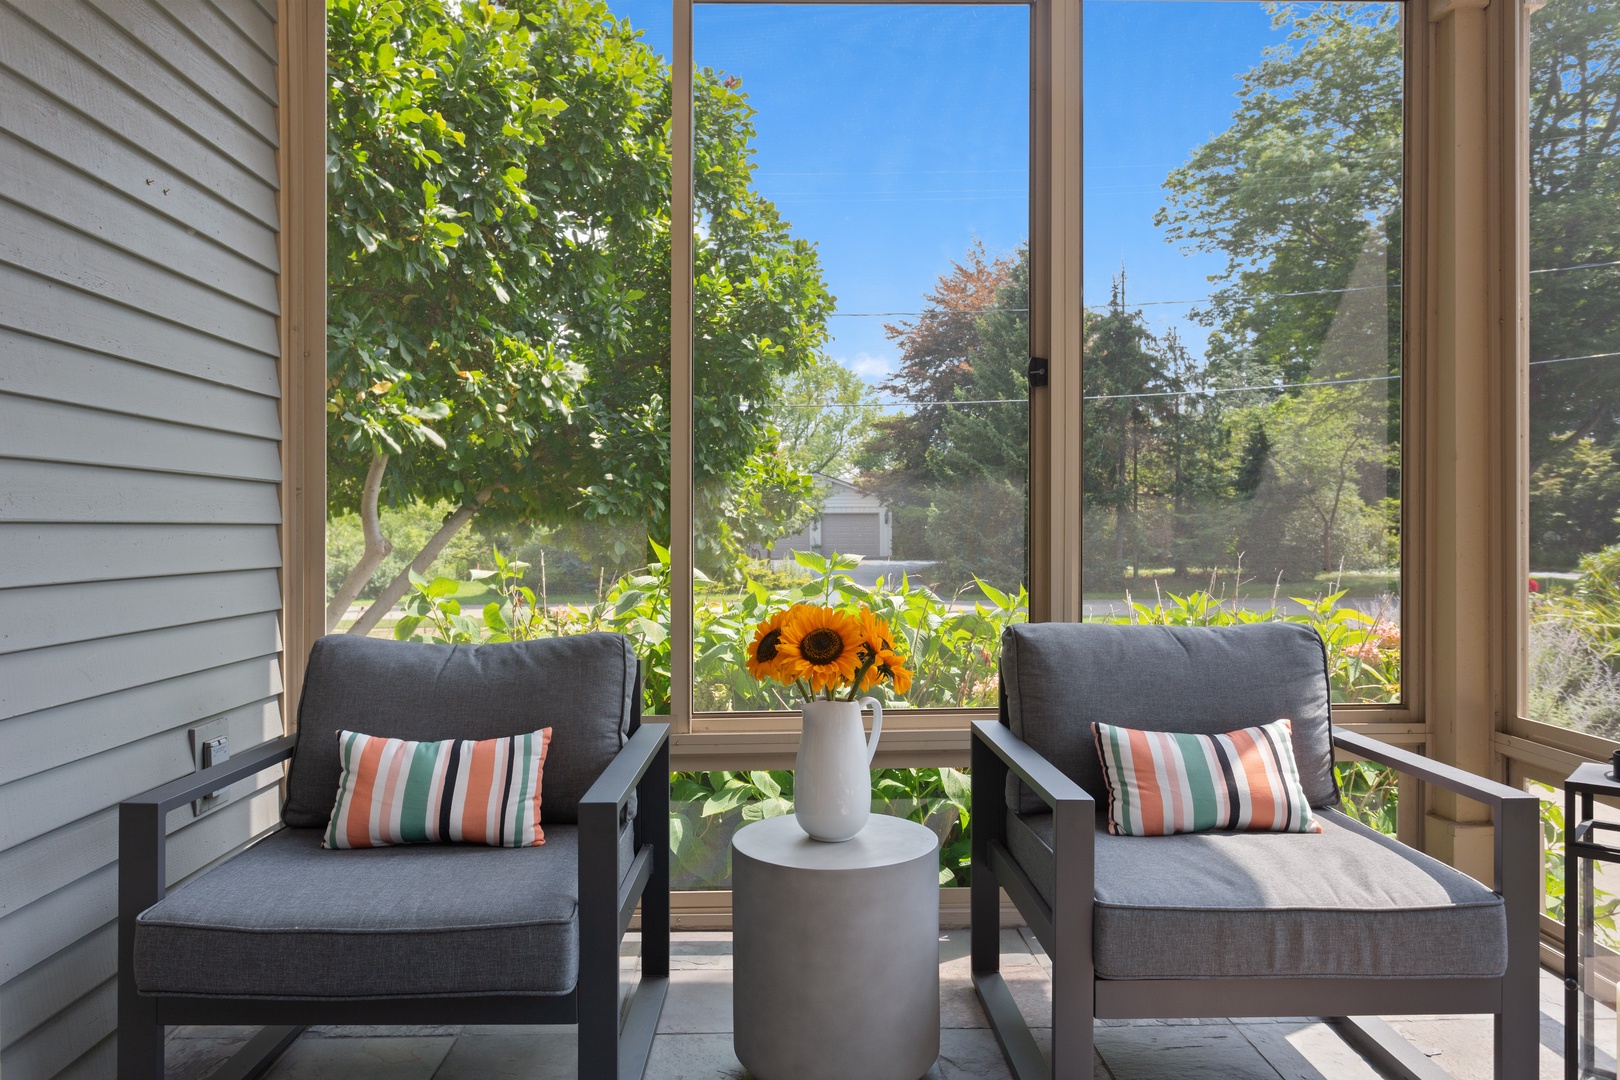 This spot in the sunroom is ideal for morning coffee.